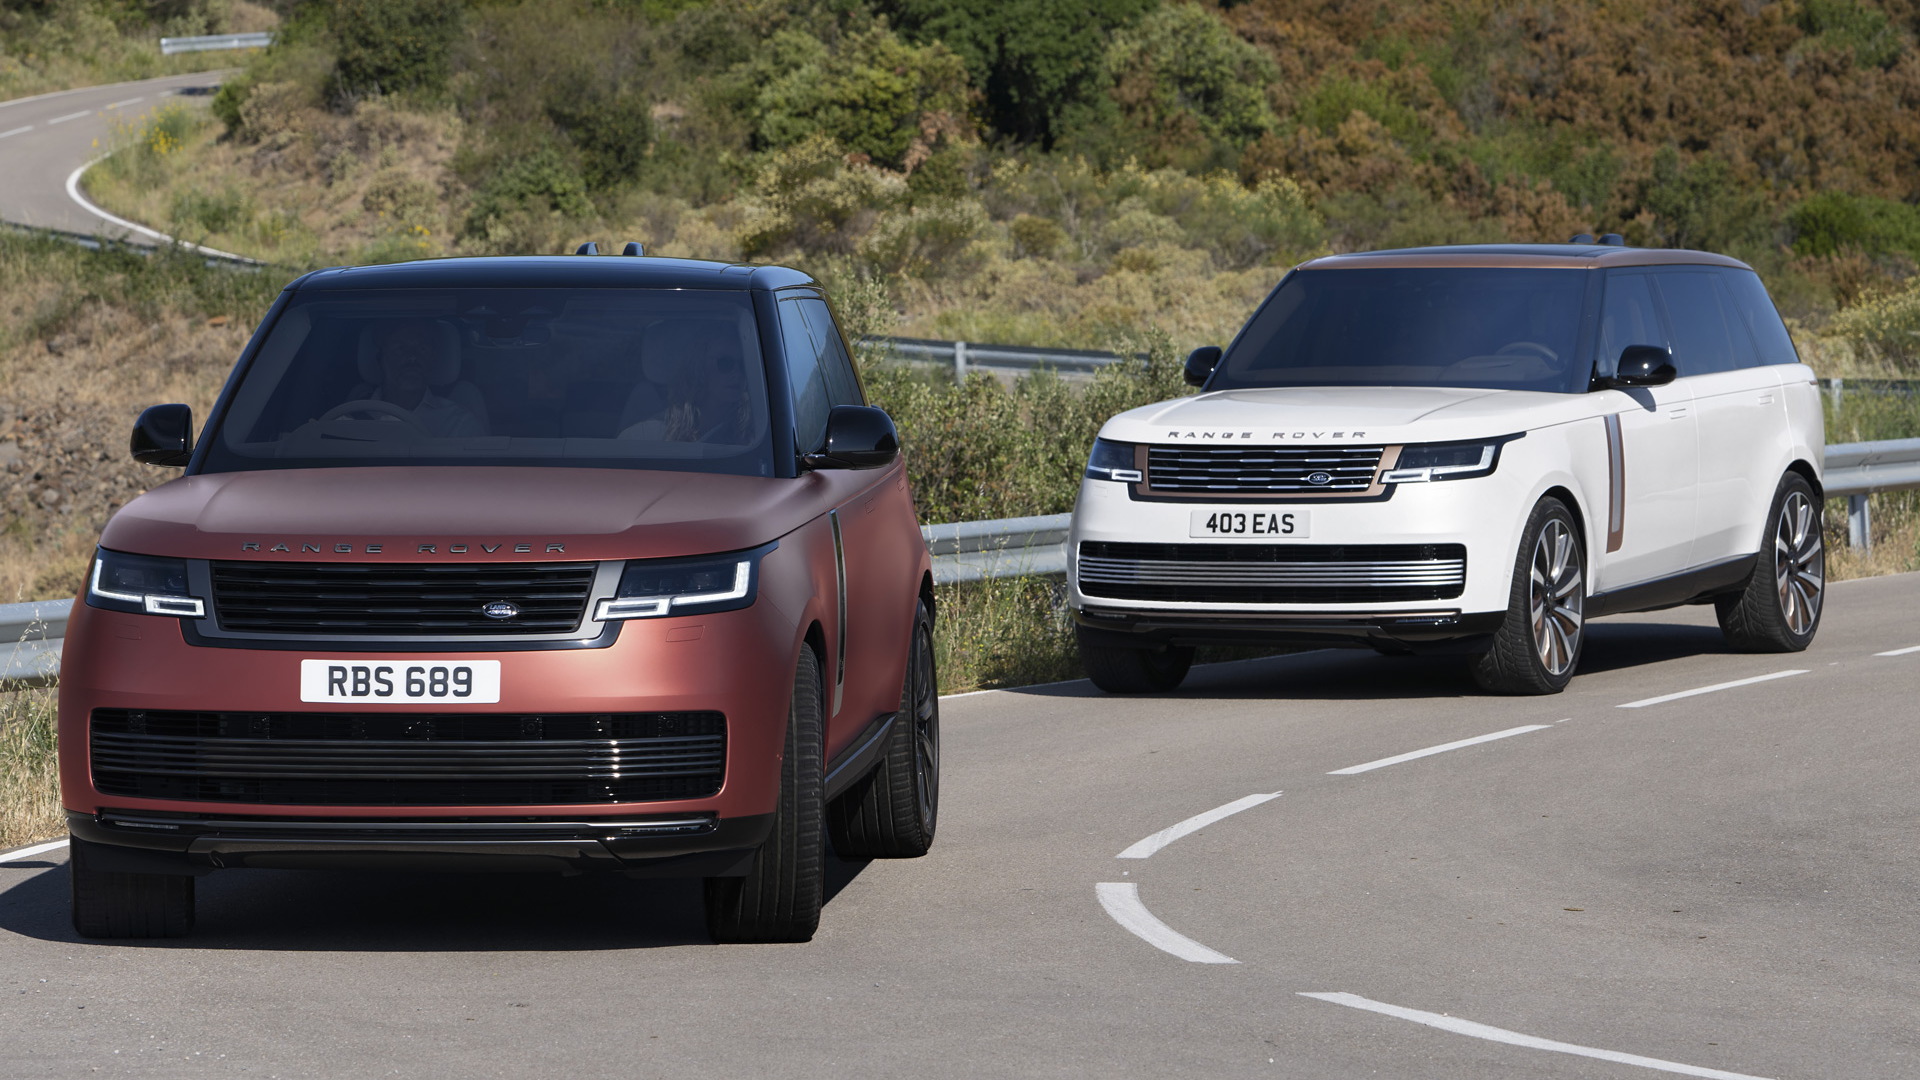 Preview: 2023 Land Rover Range Rover SV offers new level of personalization from $200